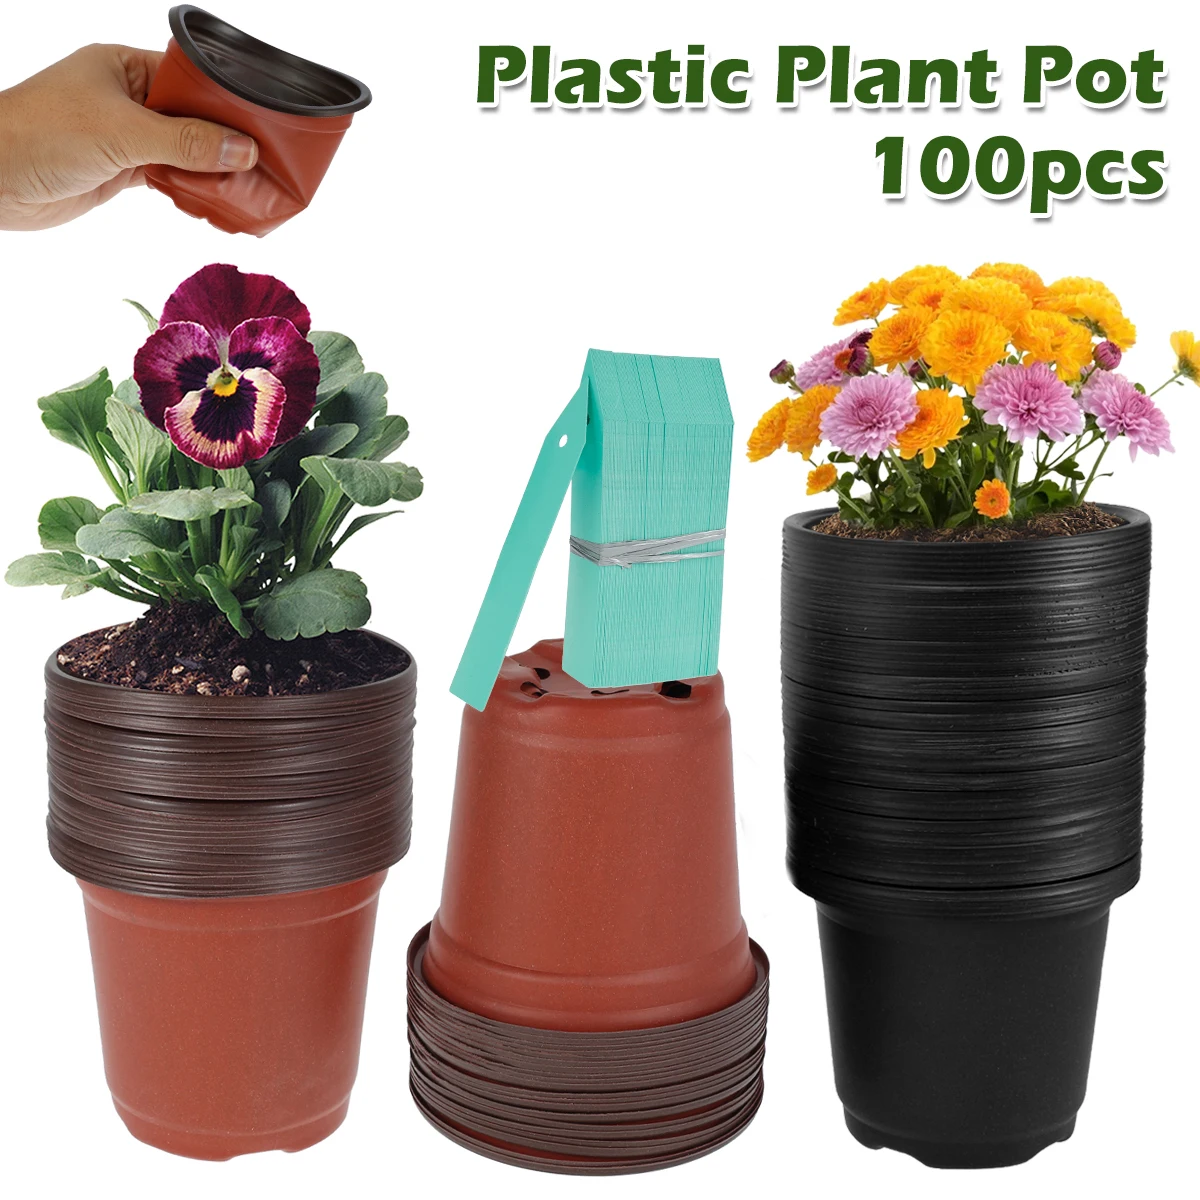 

Plant Pot 100Pcs PP Flower Pot 4in Reusable Flower Planter with 8 Drainage Holes Multipurpose Gardening Tools for Indoor Outdoor